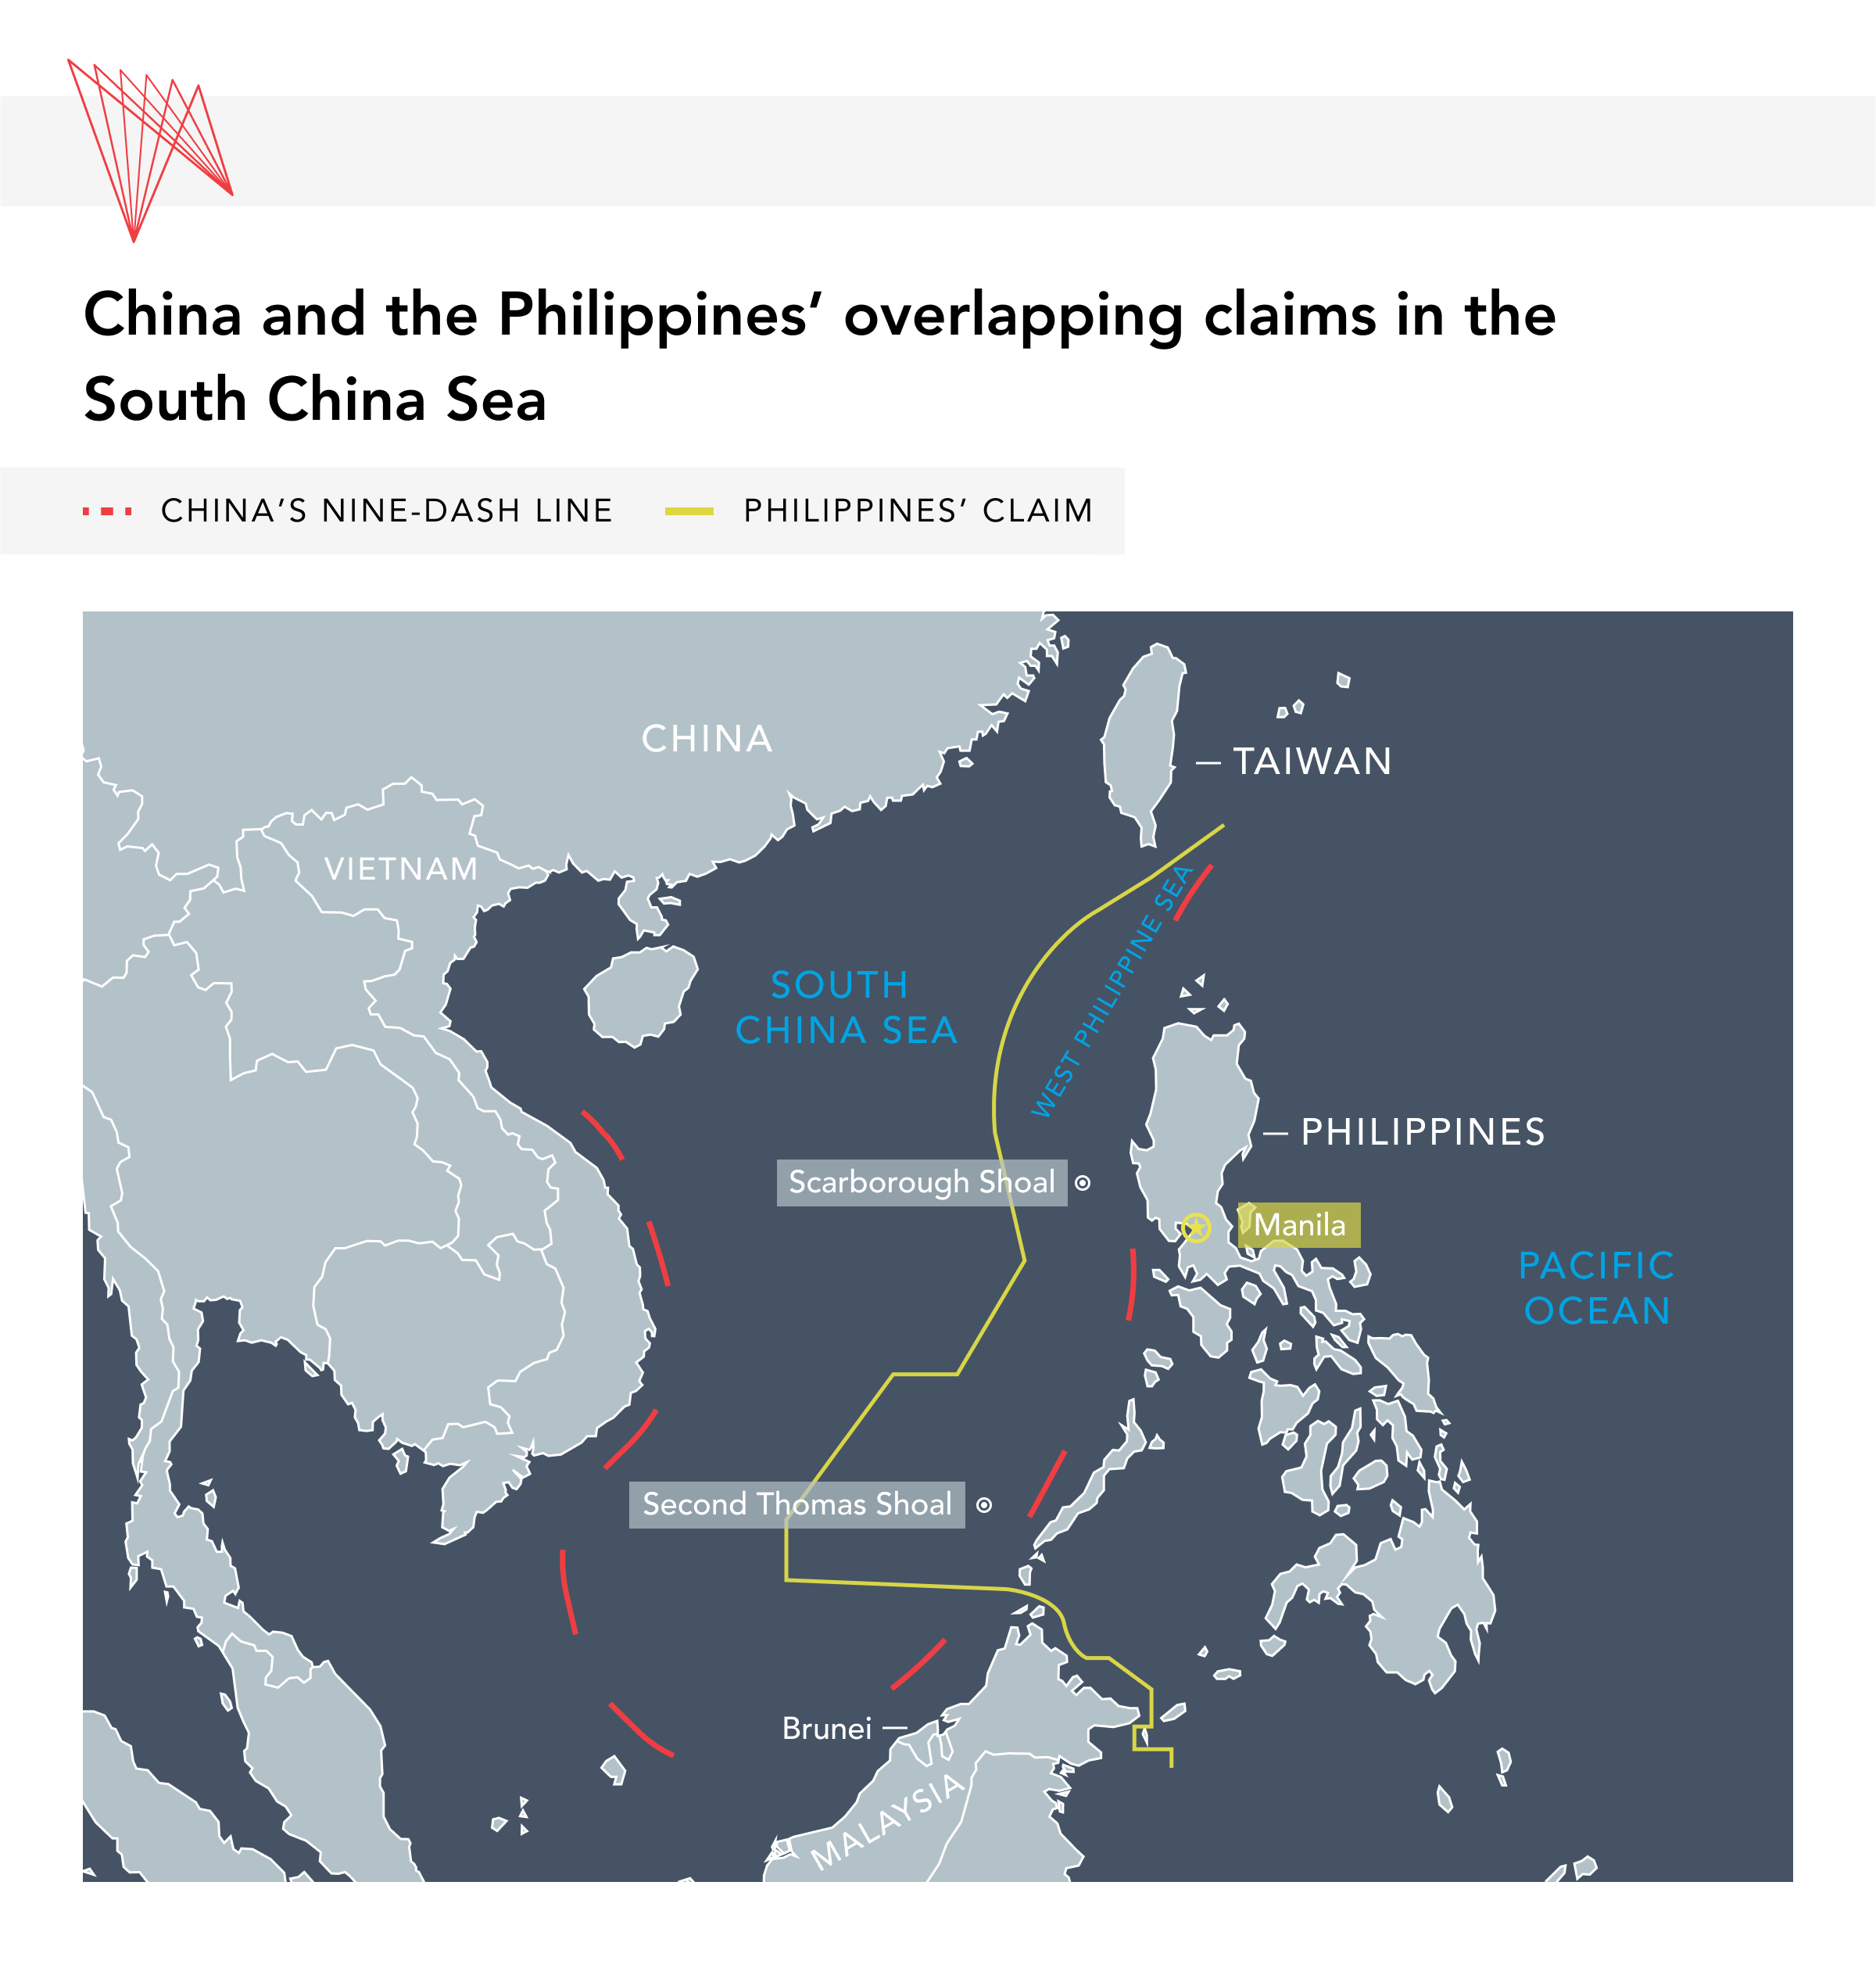 Overlapping claims in the South China Sea